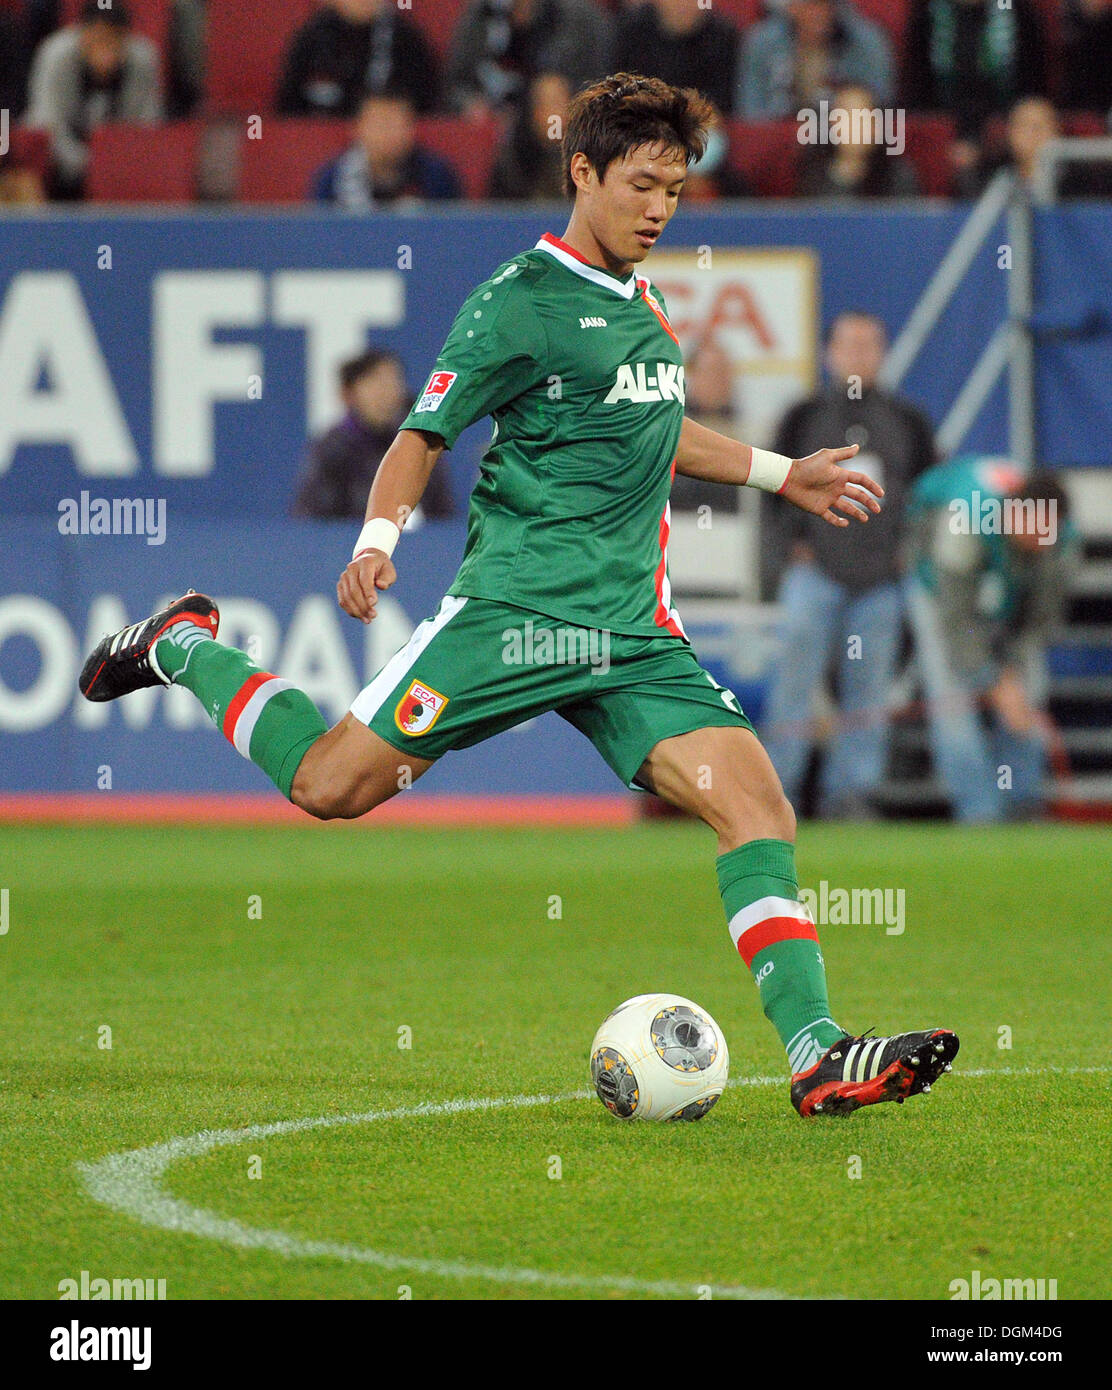 Augsburg, Germany. 20th Oct, 2013. Augsburg's Jeong-Ho Hong plays the ball during the German Bundesliga soccer match between FC Augsburg and VfL Wolfsburg at the SGL-Arena in Augsburg, Germany, 20 October 2013. Photo: STEFAN PUCHNER/dpa/Alamy Live News Stock Photo